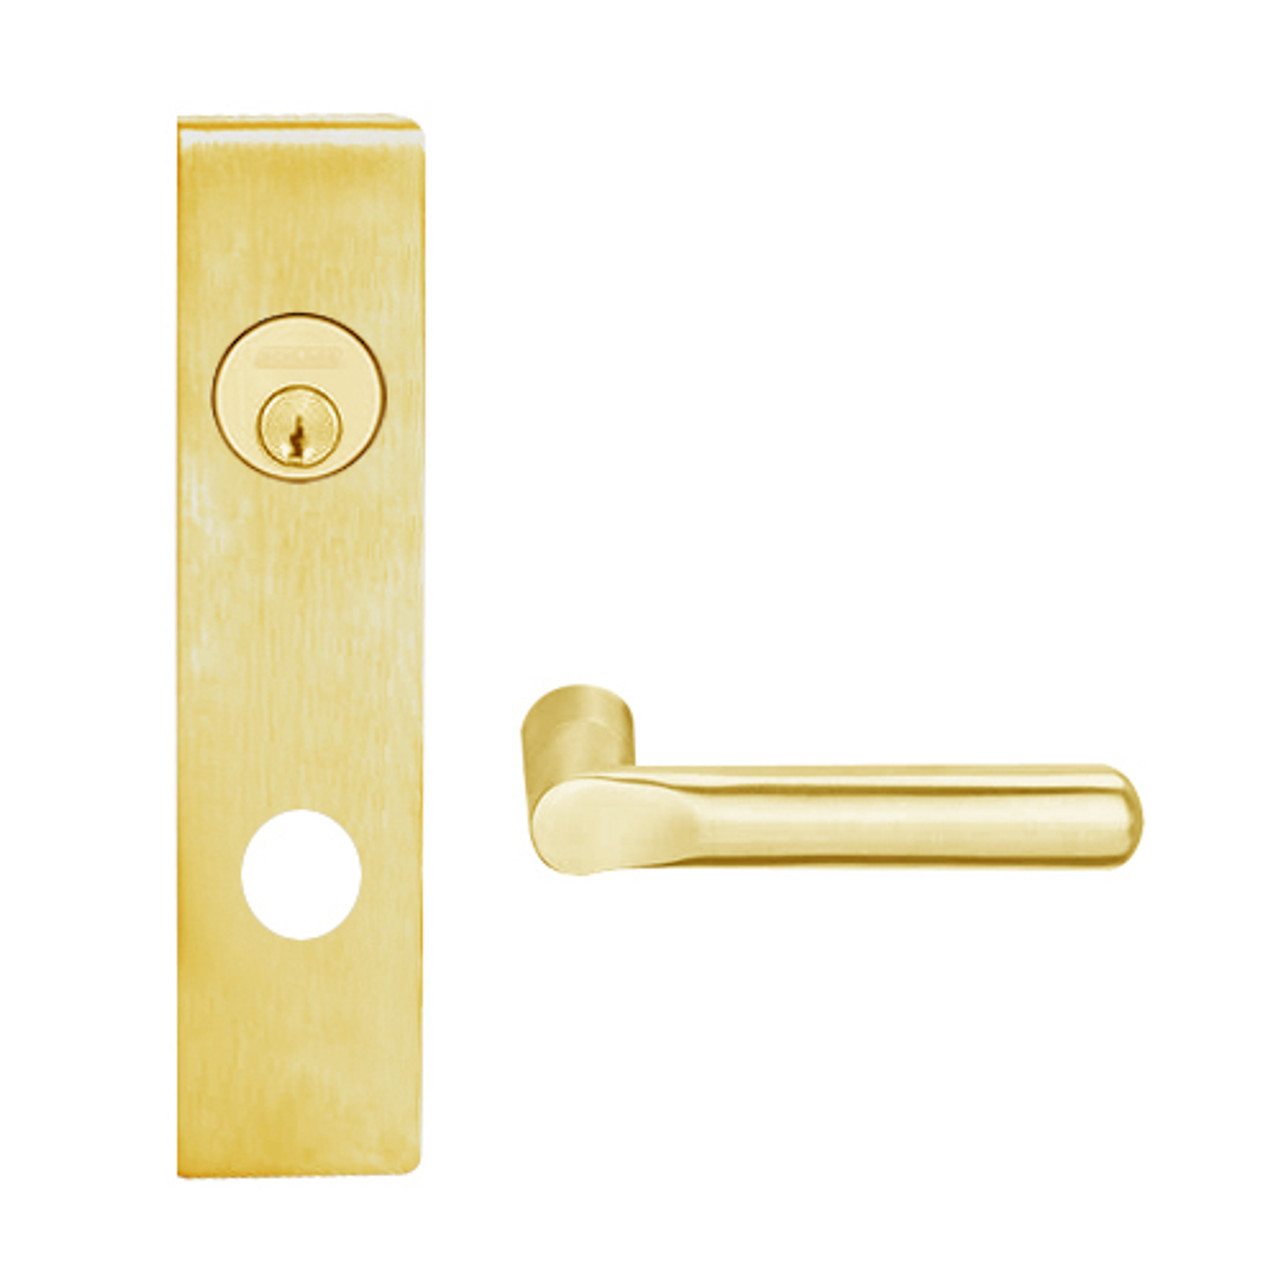 L9050L-18L-605 Schlage L Series Less Cylinder Entrance Commercial Mortise Lock with 18 Cast Lever Design in Bright Brass